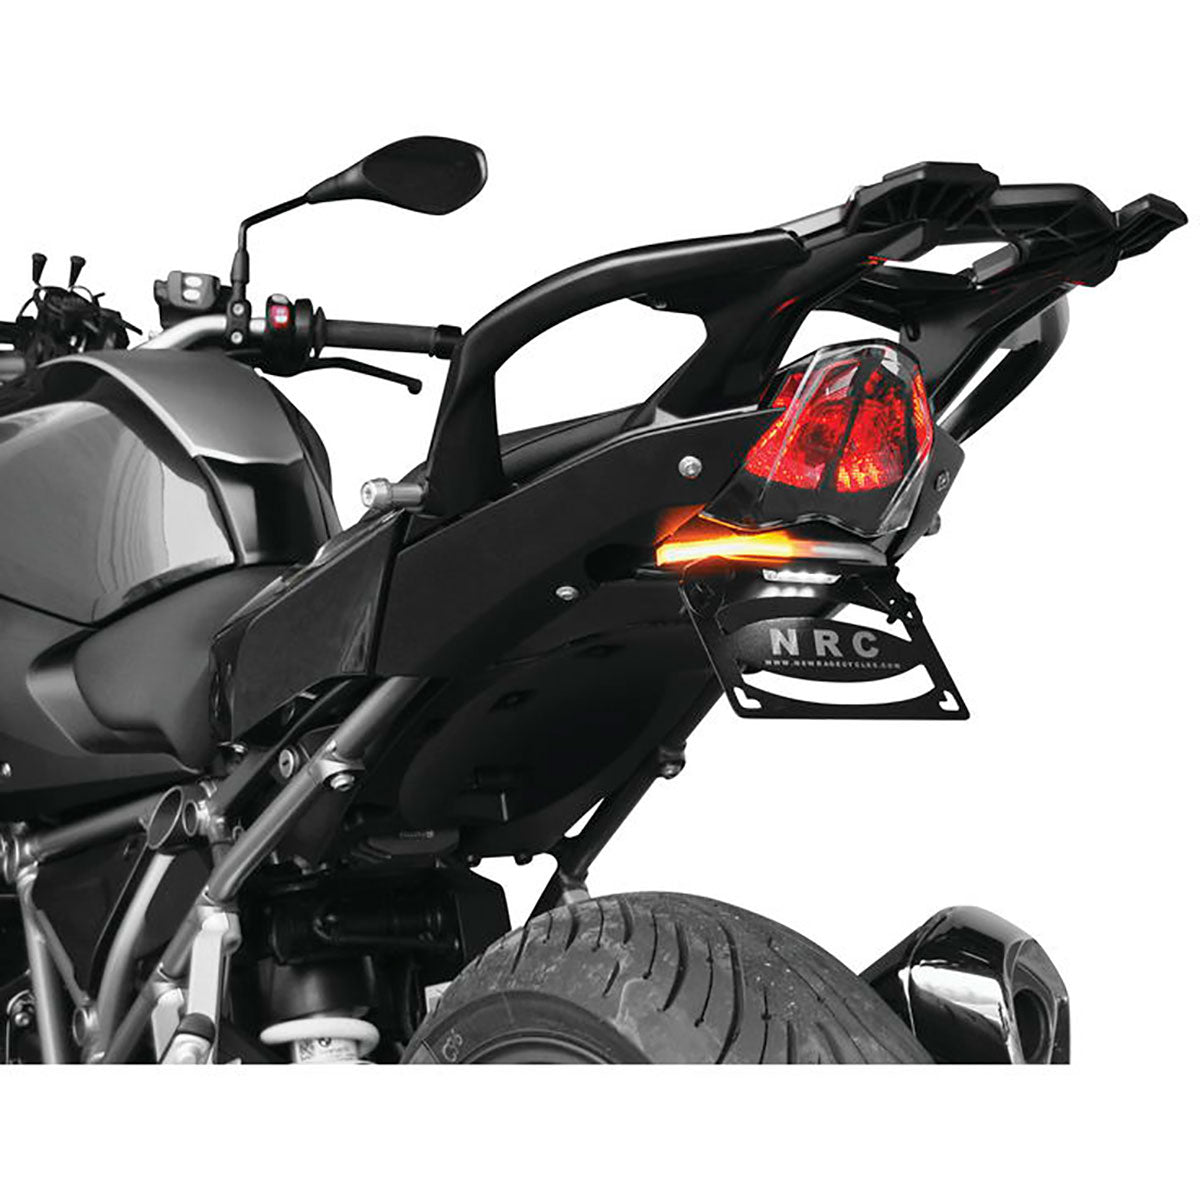 LED | - Motorcycle Action New Eliminator Accessor Rage Shop Sports Cycles Fender Haustrom.com – R1200R BMW